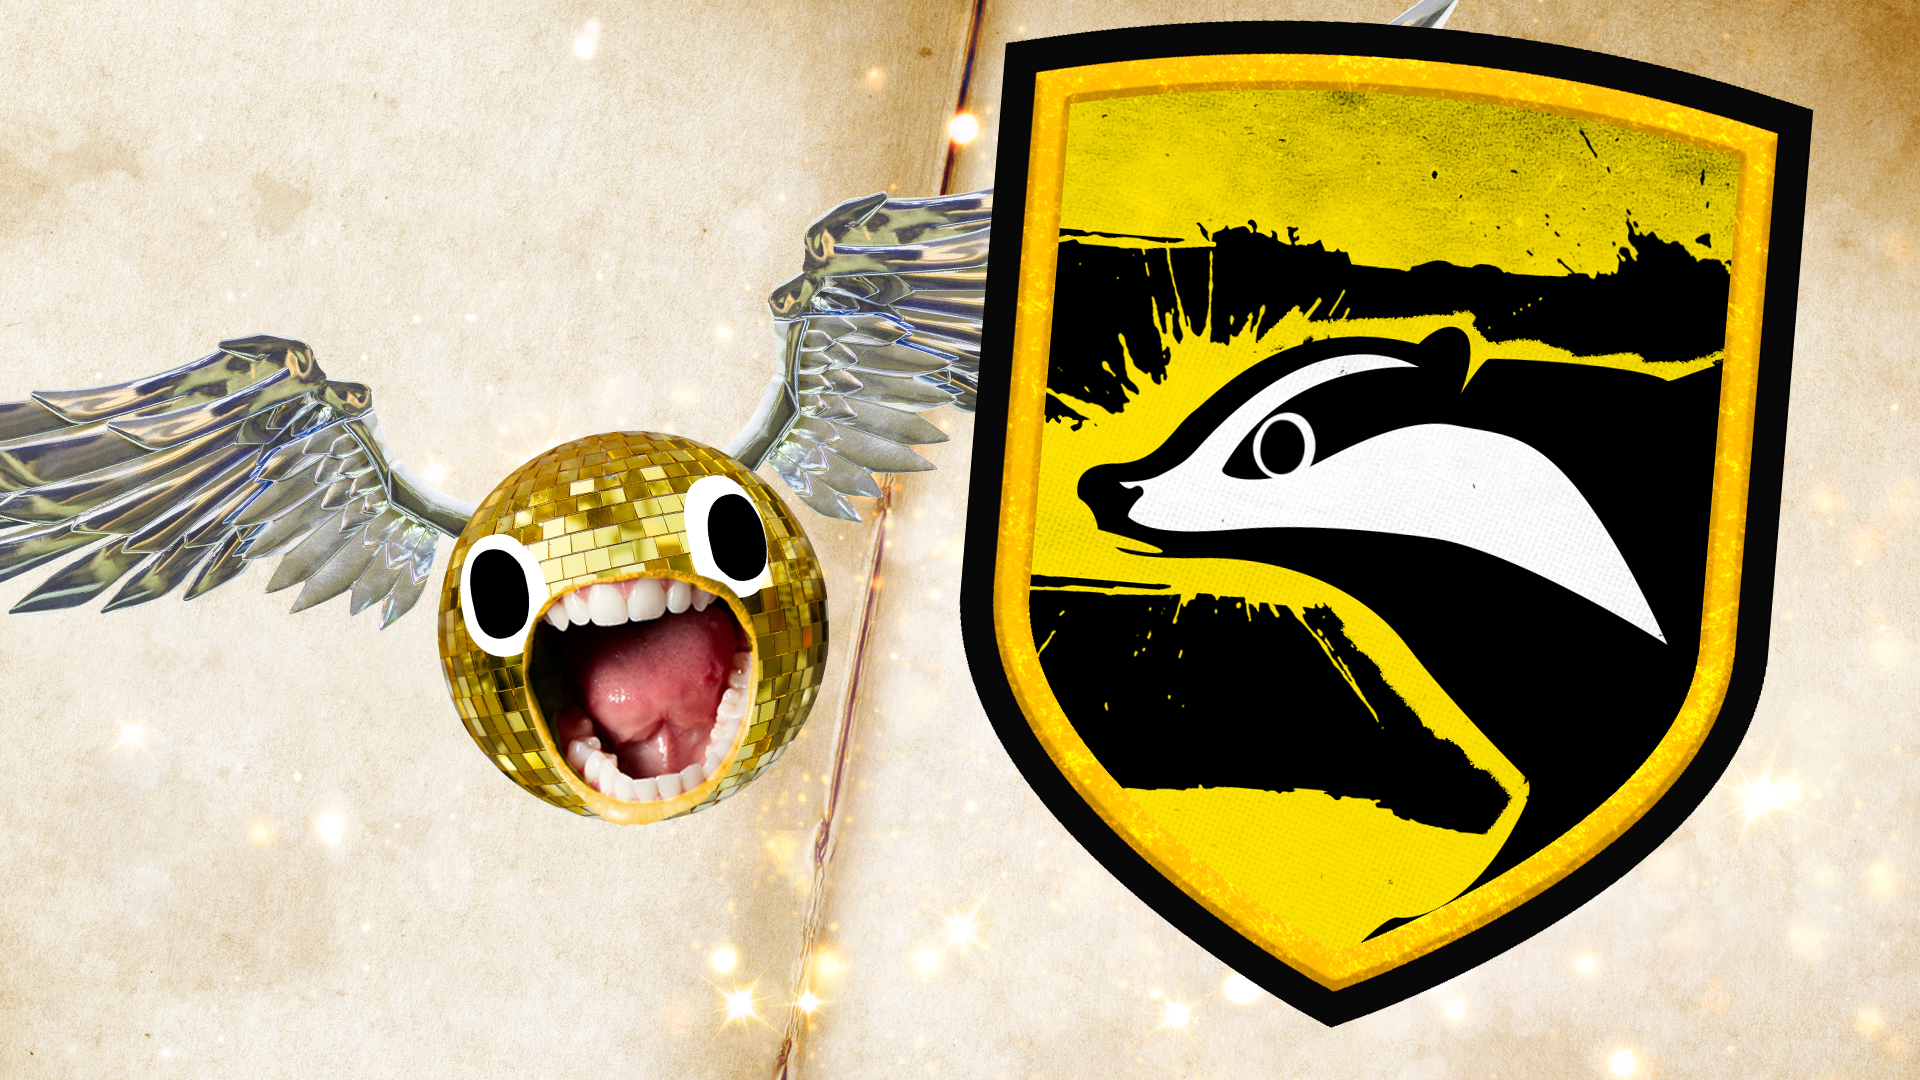 Hufflepuff crest and snitch